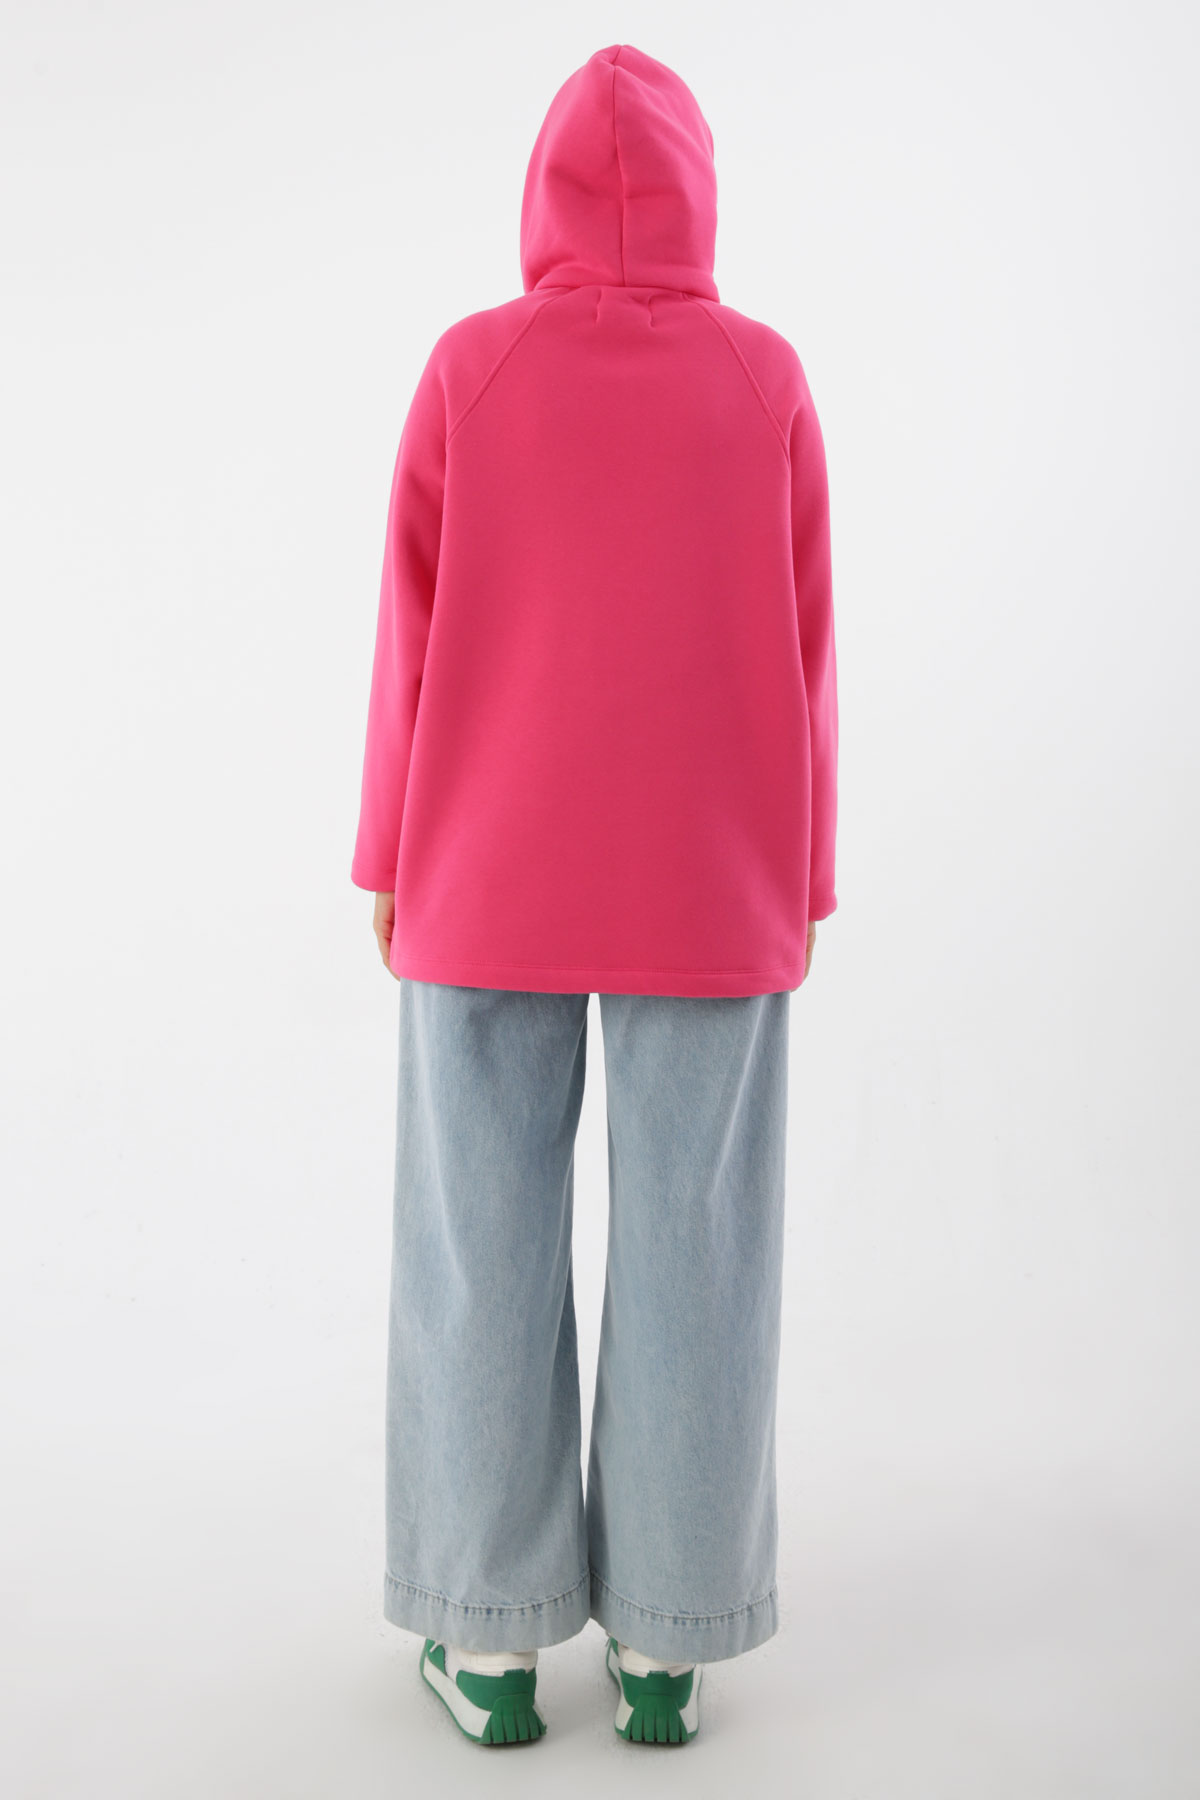 A wholesale clothing model wears all11881-comfortable-fit-sweat-tunic-with-accessory-detail-on-the-collar-fuchsia, Turkish wholesale Sweatshirt of Allday